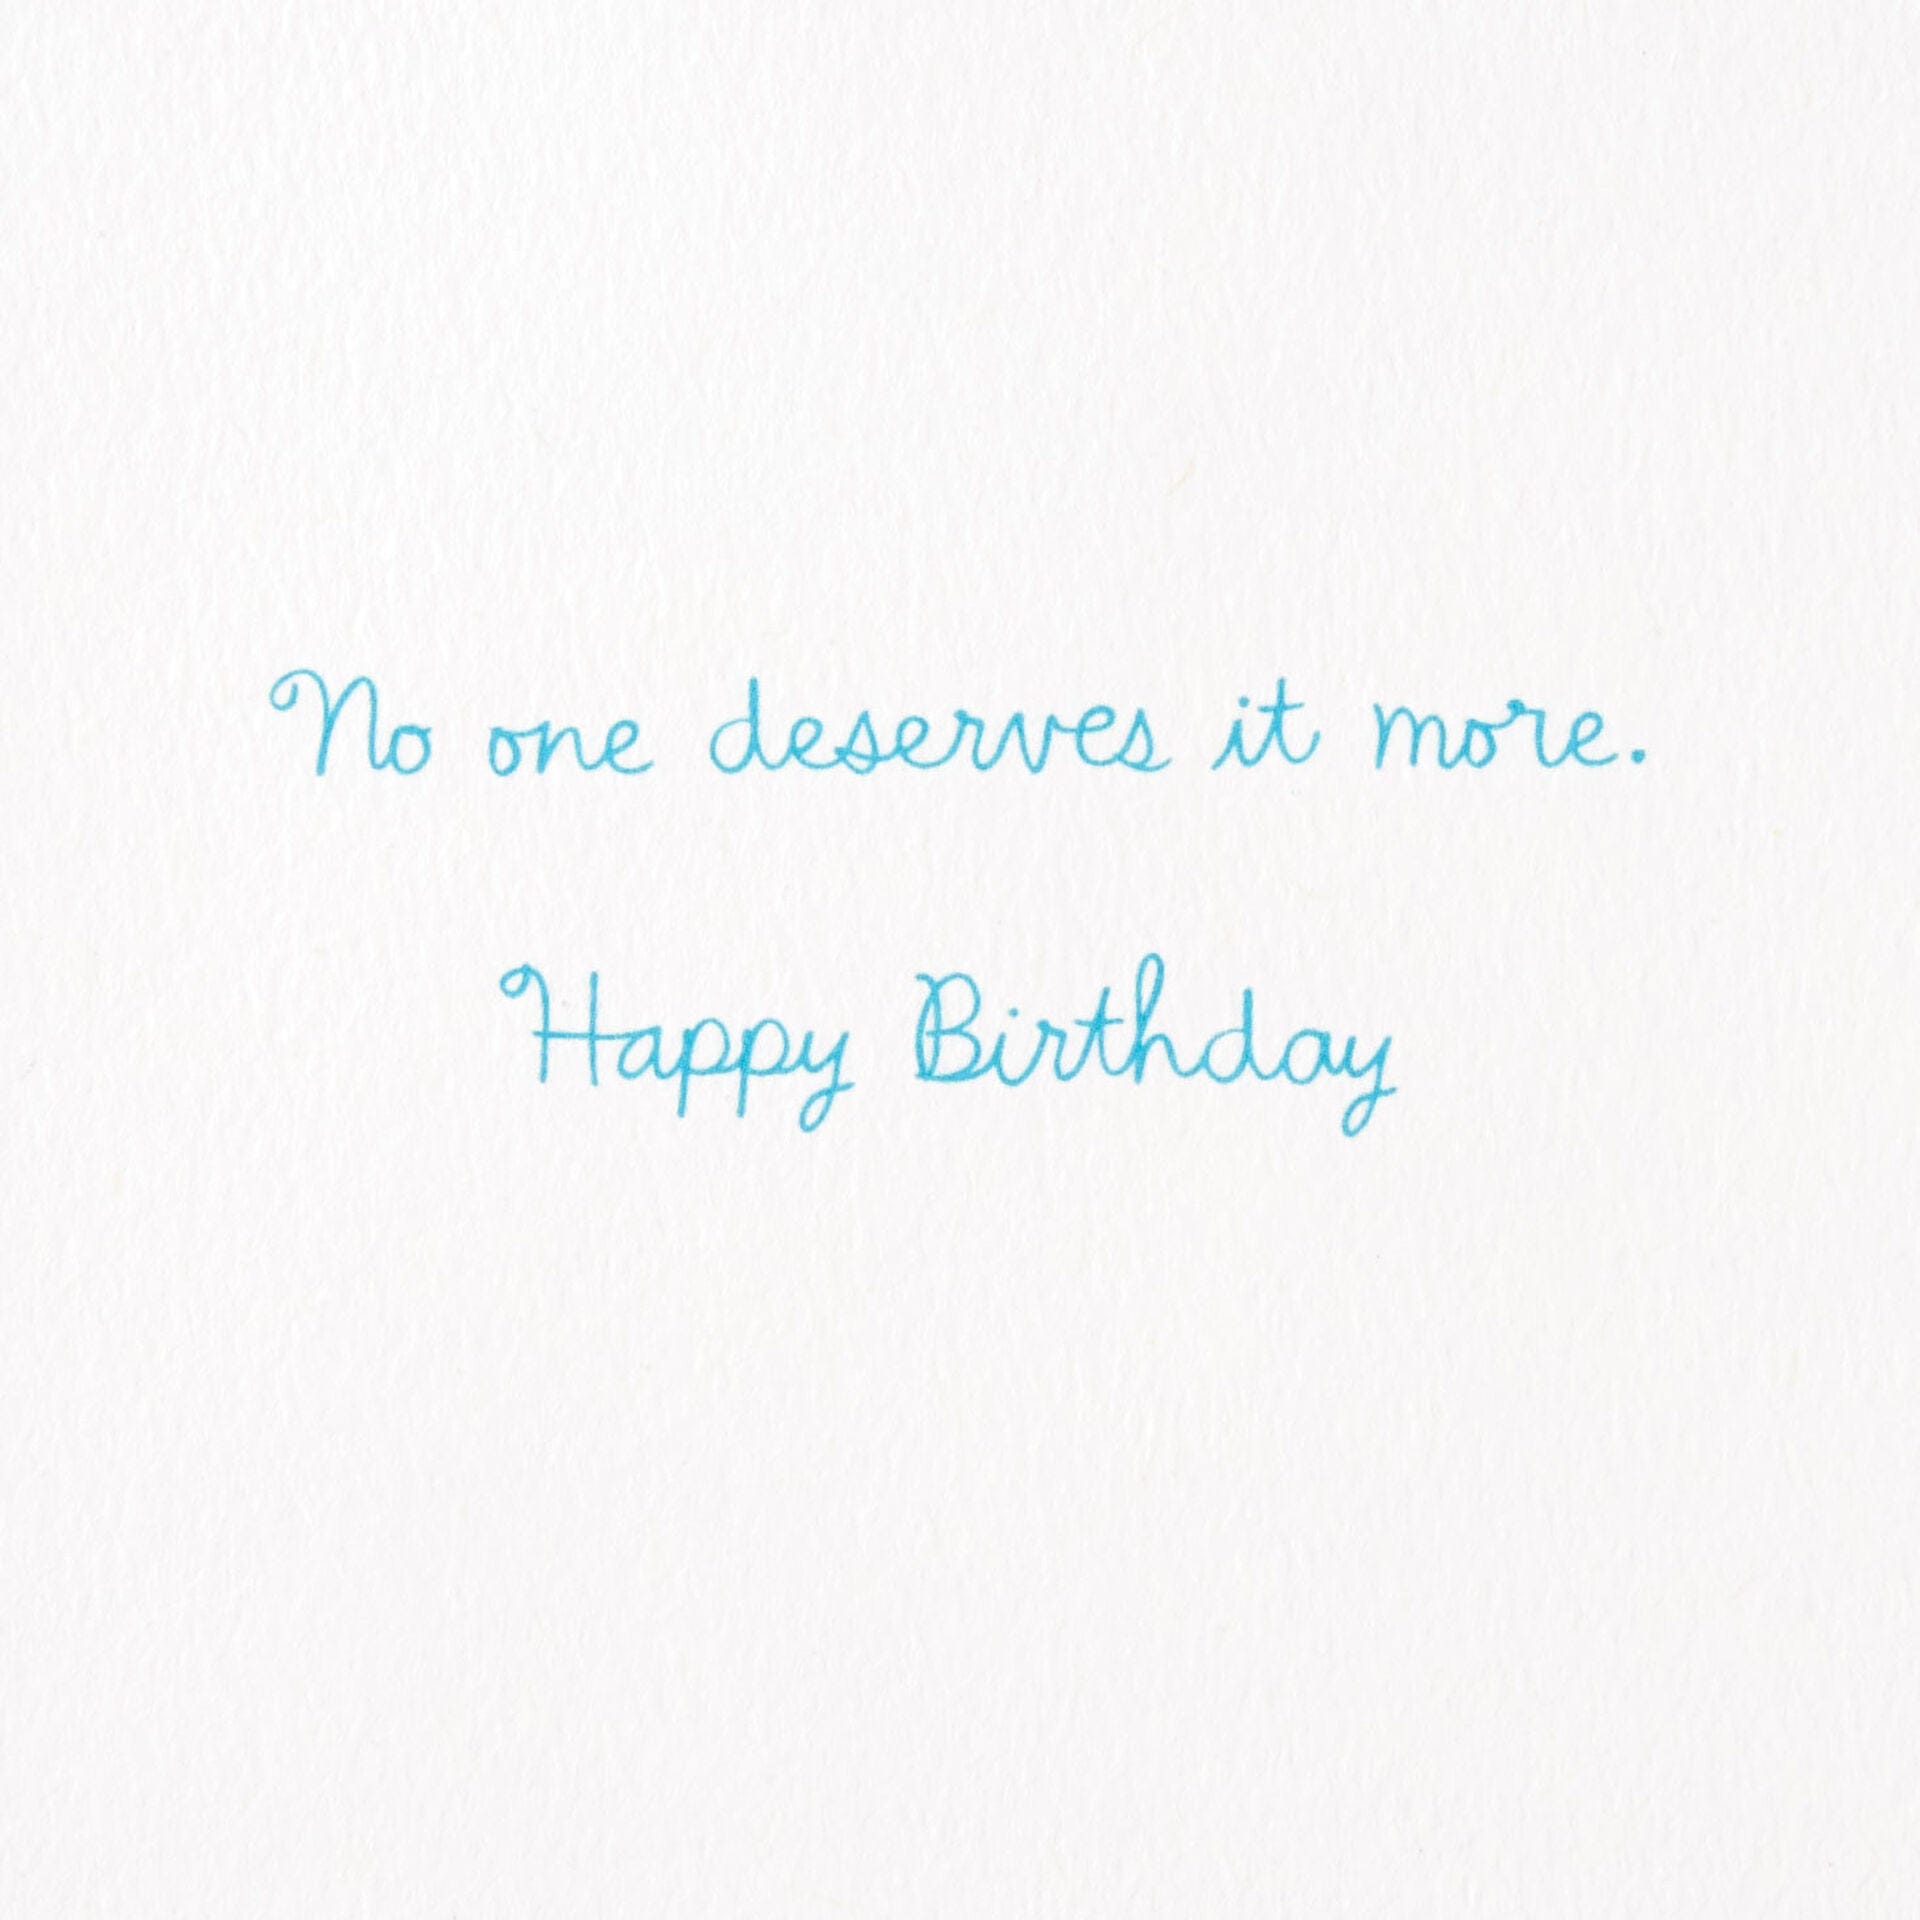 You Deserve a Sweet Day Birthday Card for Her - Shelburne Country Store